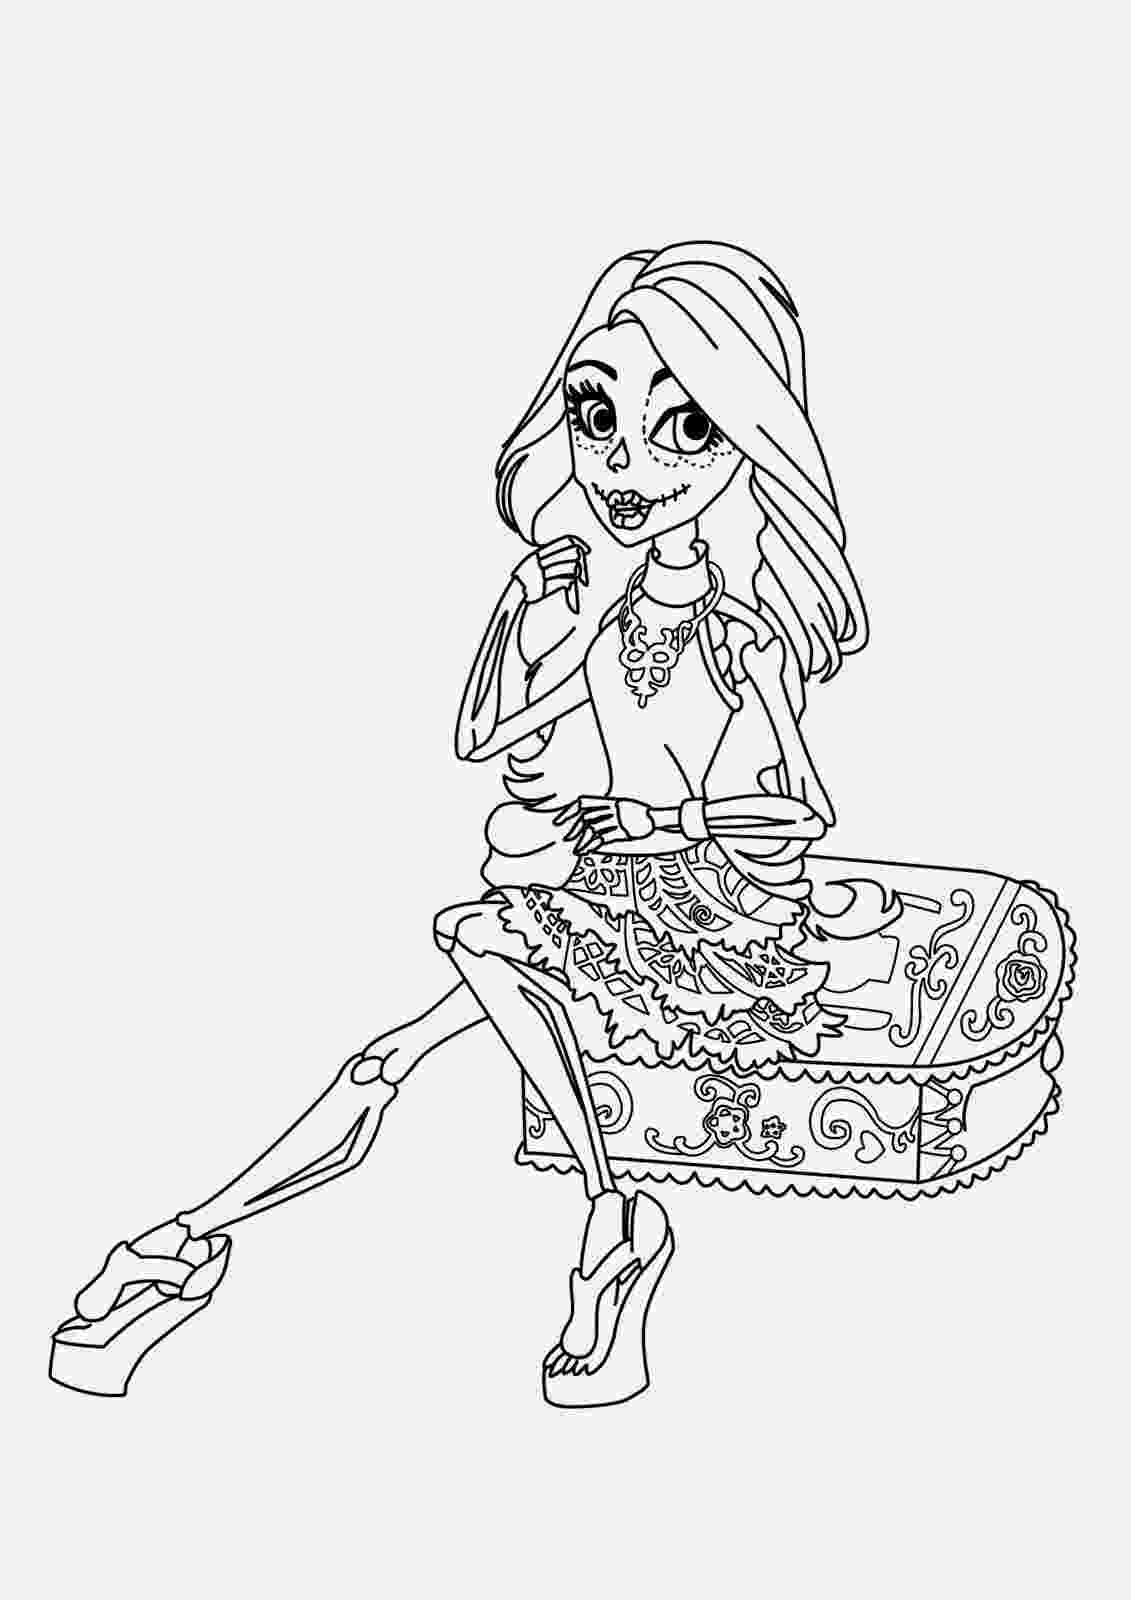 monster high coloring pics coloring pages monster high coloring pages free and printable pics coloring high monster 